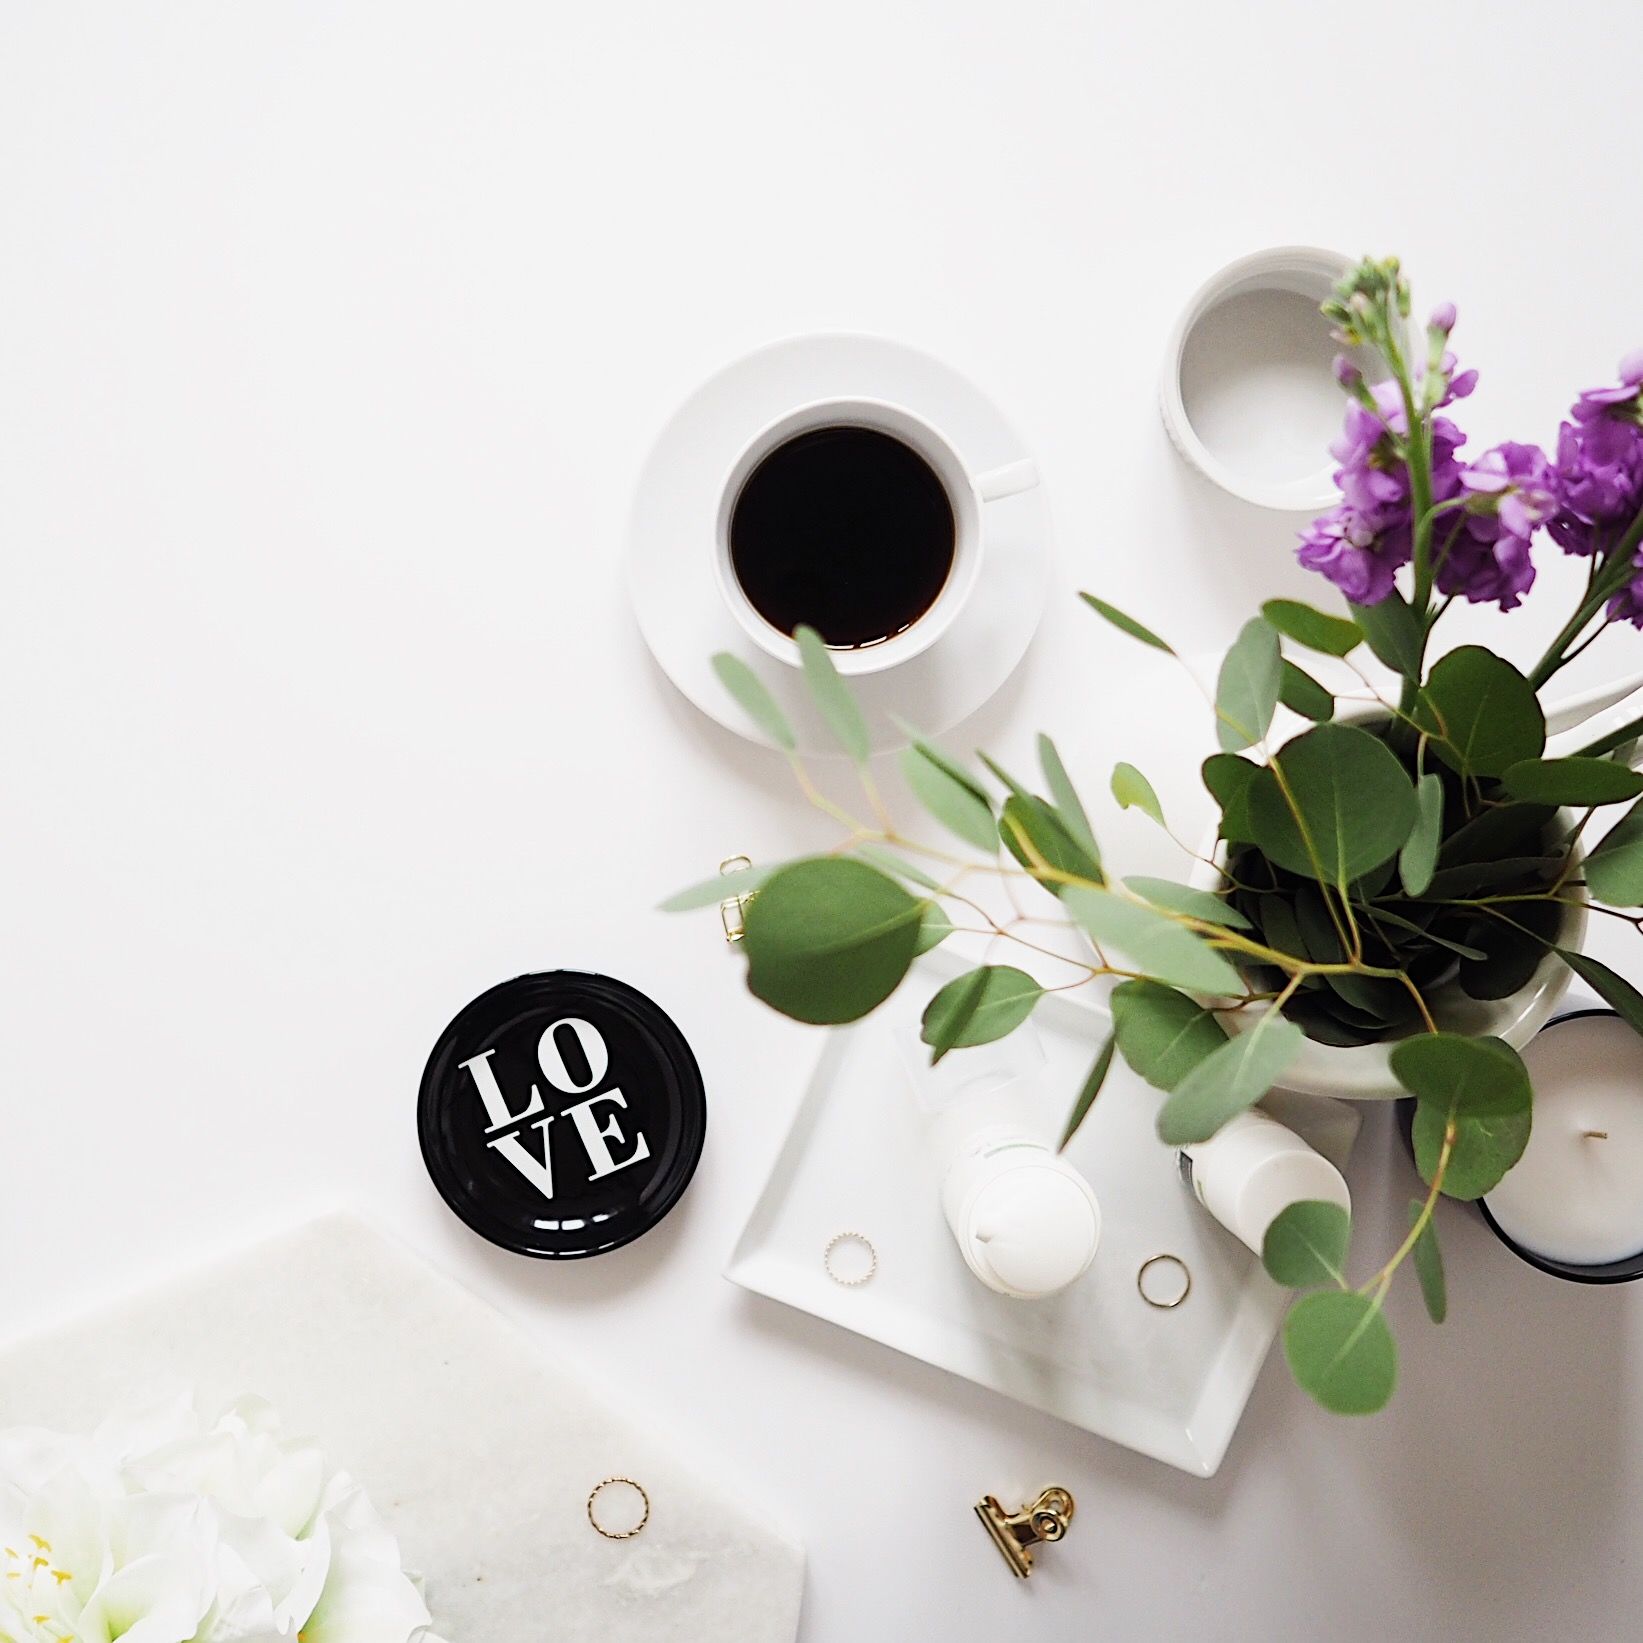 Flatlay with coffee, violet flowers and little black LOVE plate